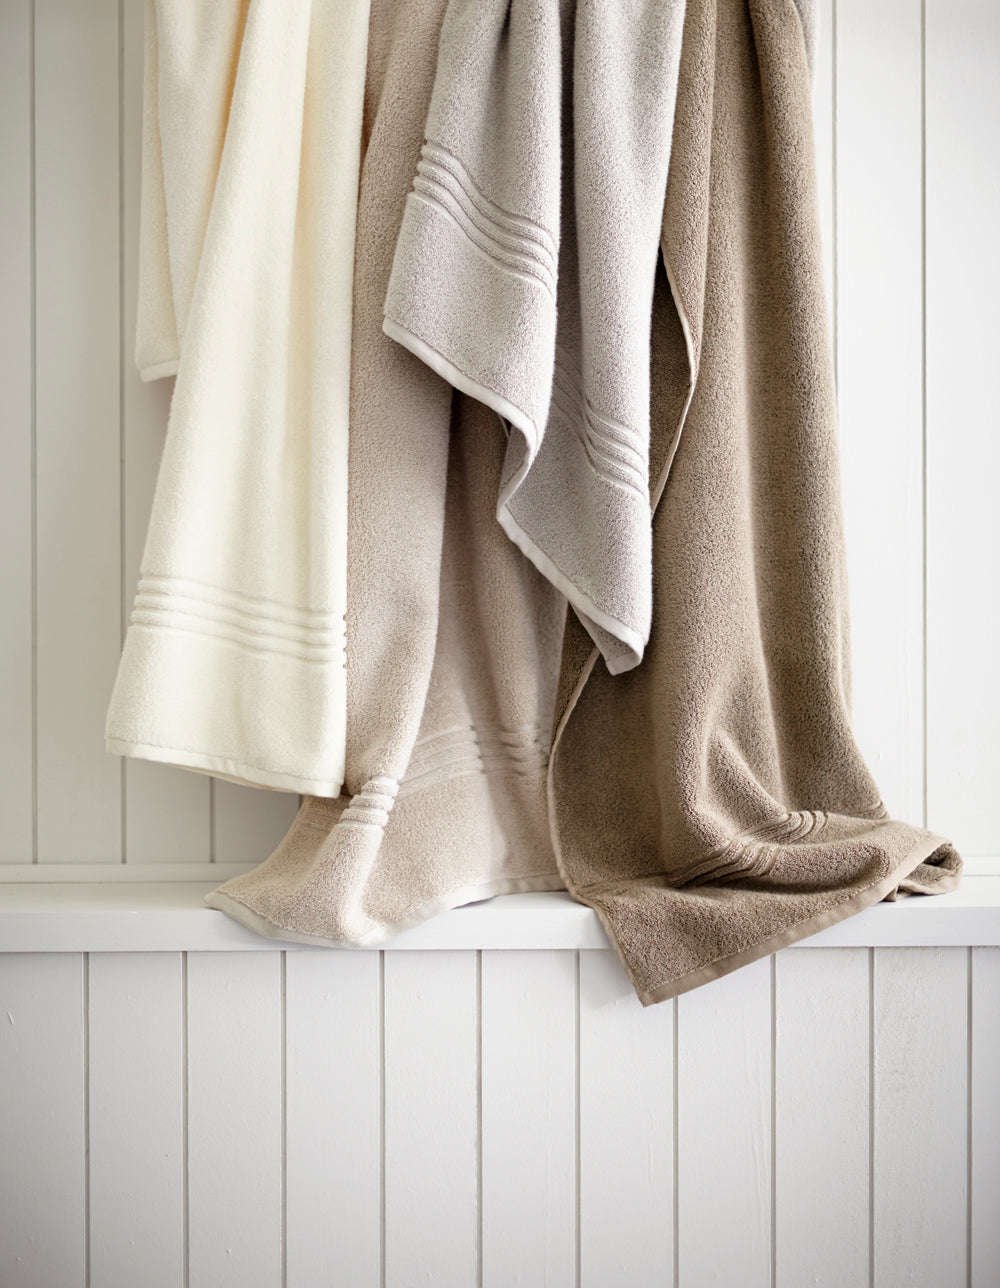 Chelsea Bath Towels from Peacock Alley in various neutral shades